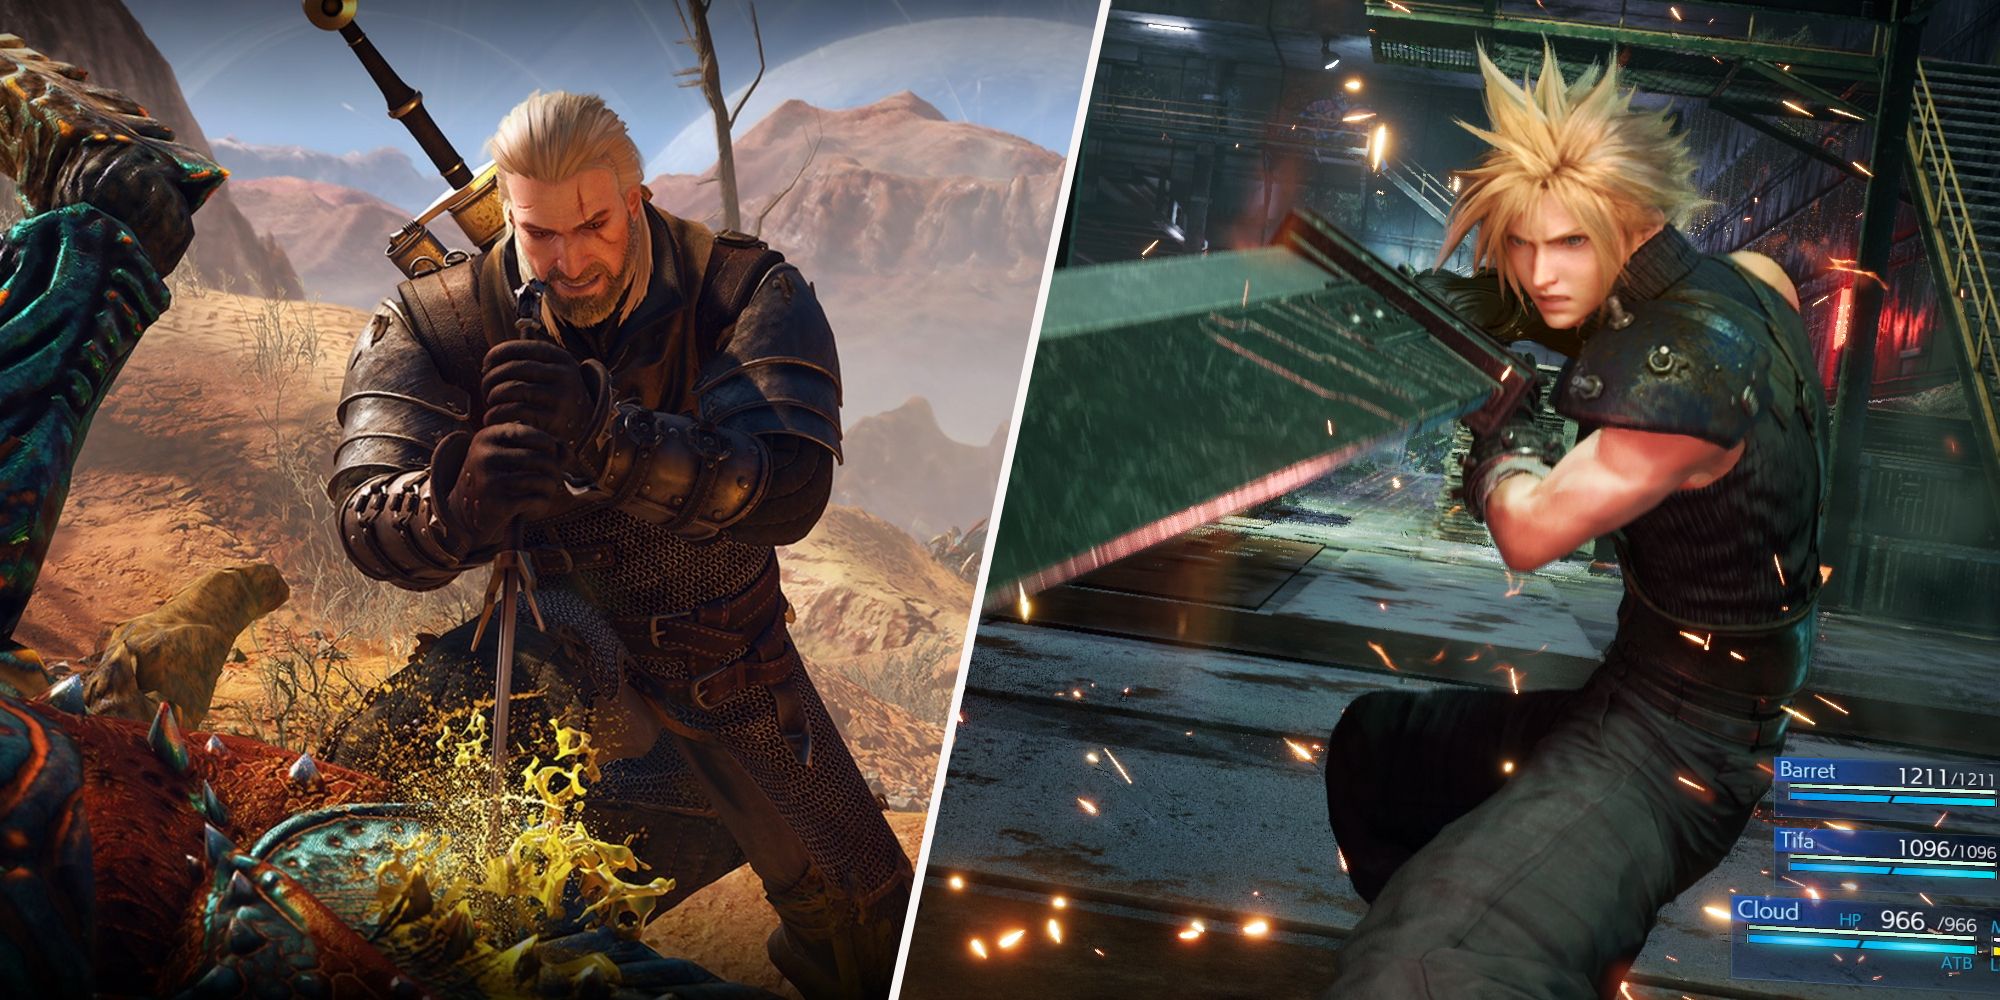 The Witcher 3 Geralt of Rivia Slaying Beatle Creature and Final Fantasy 7Cloud In Battle With Buster Sword